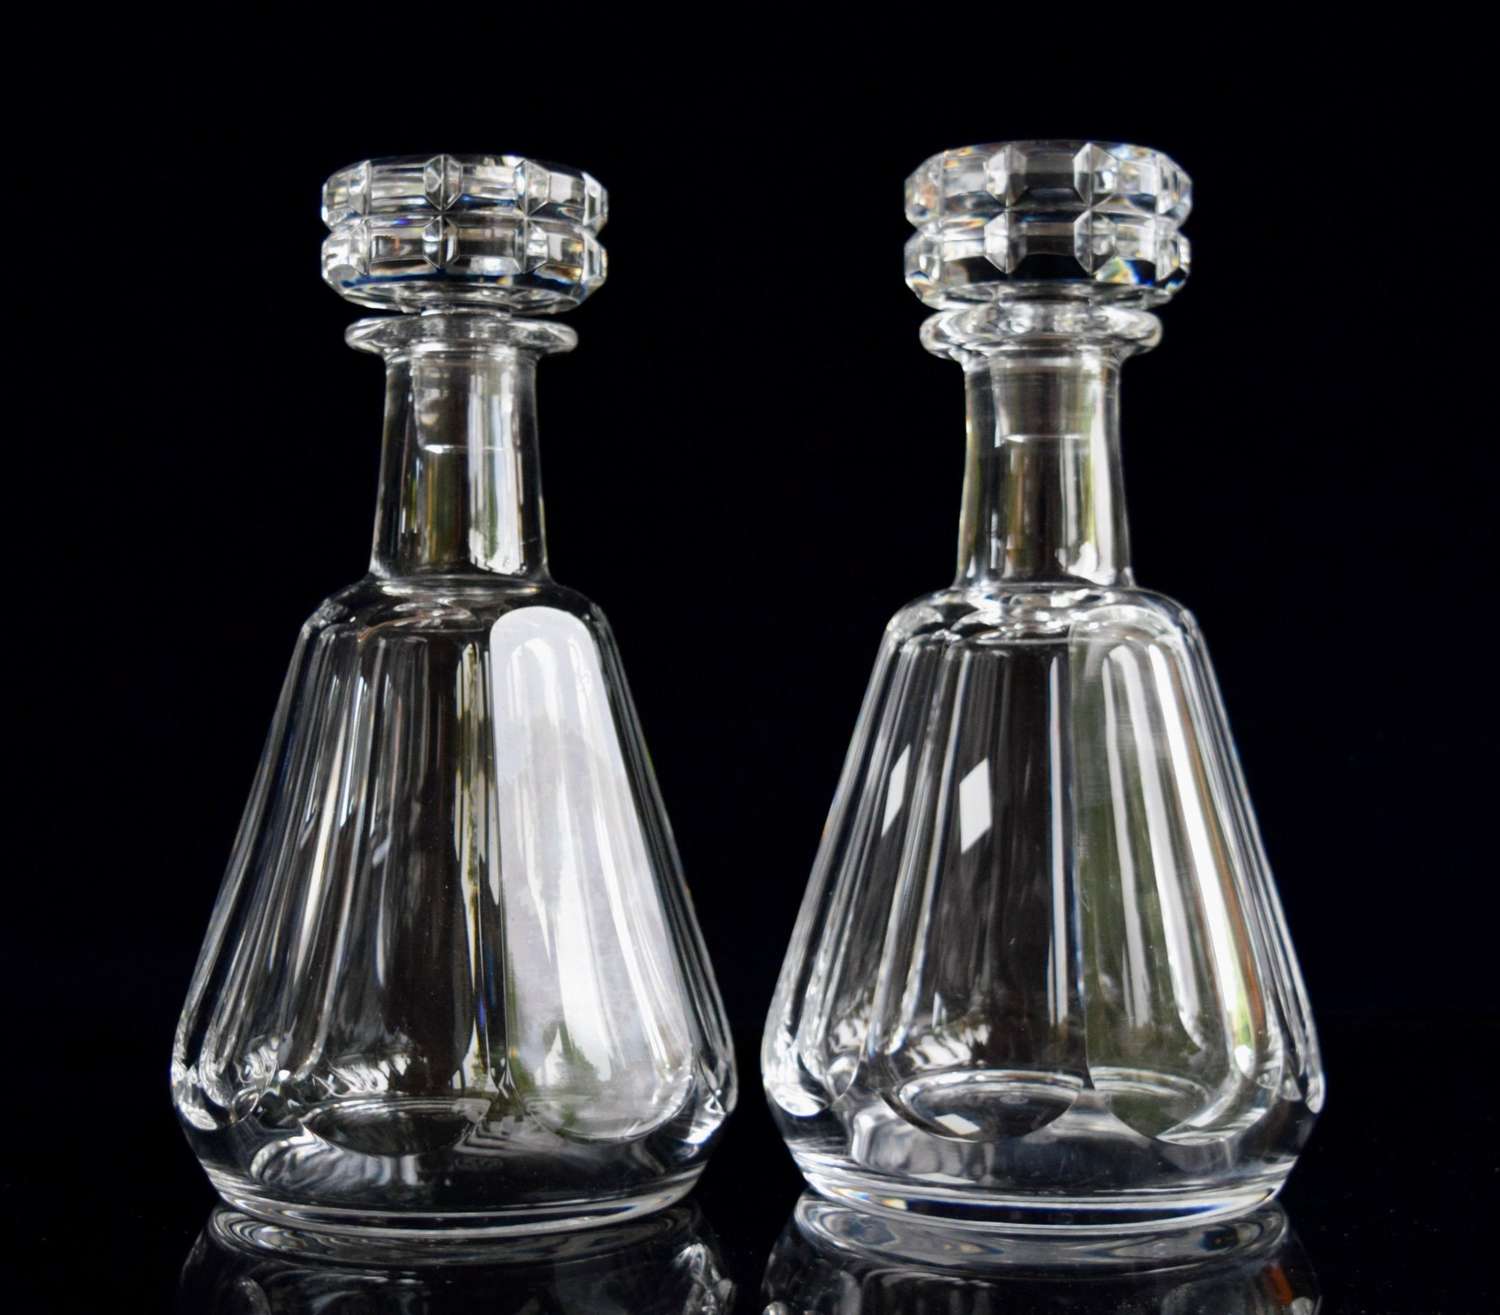 A Pair Of Baccarat Talleyrand Decanters In Collectors Condition